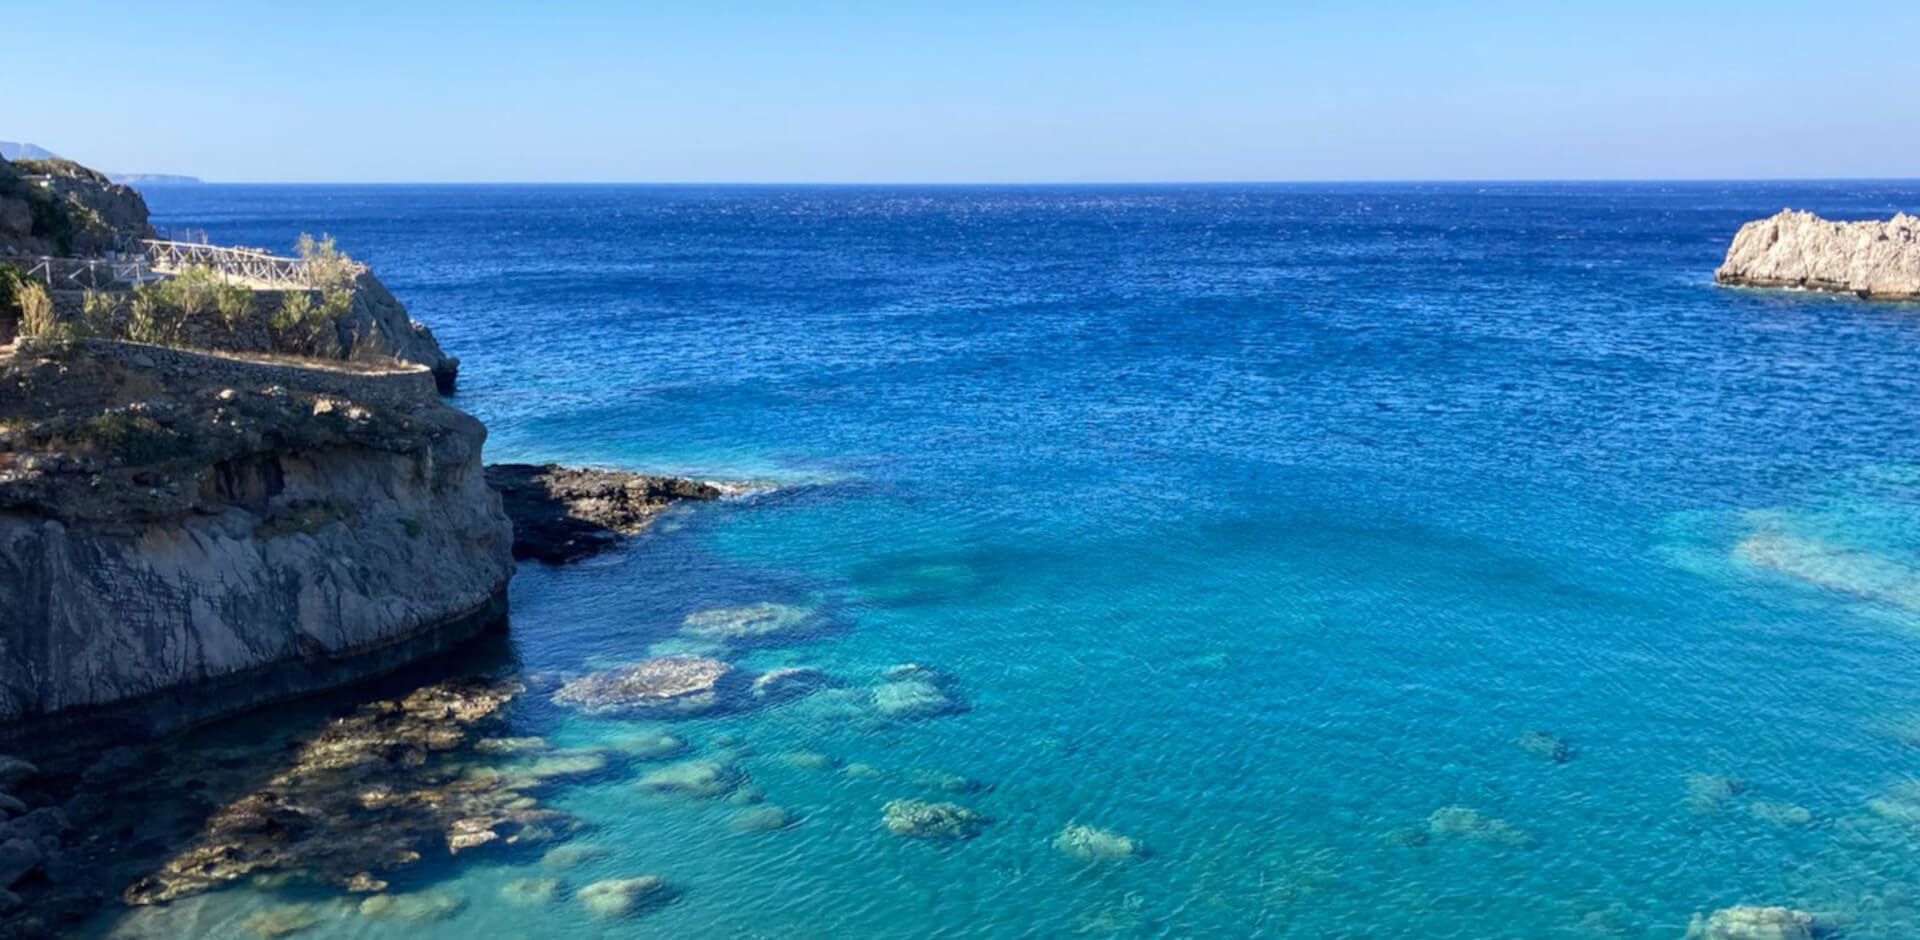 The clear waters of Agios Pavlos bay Crete